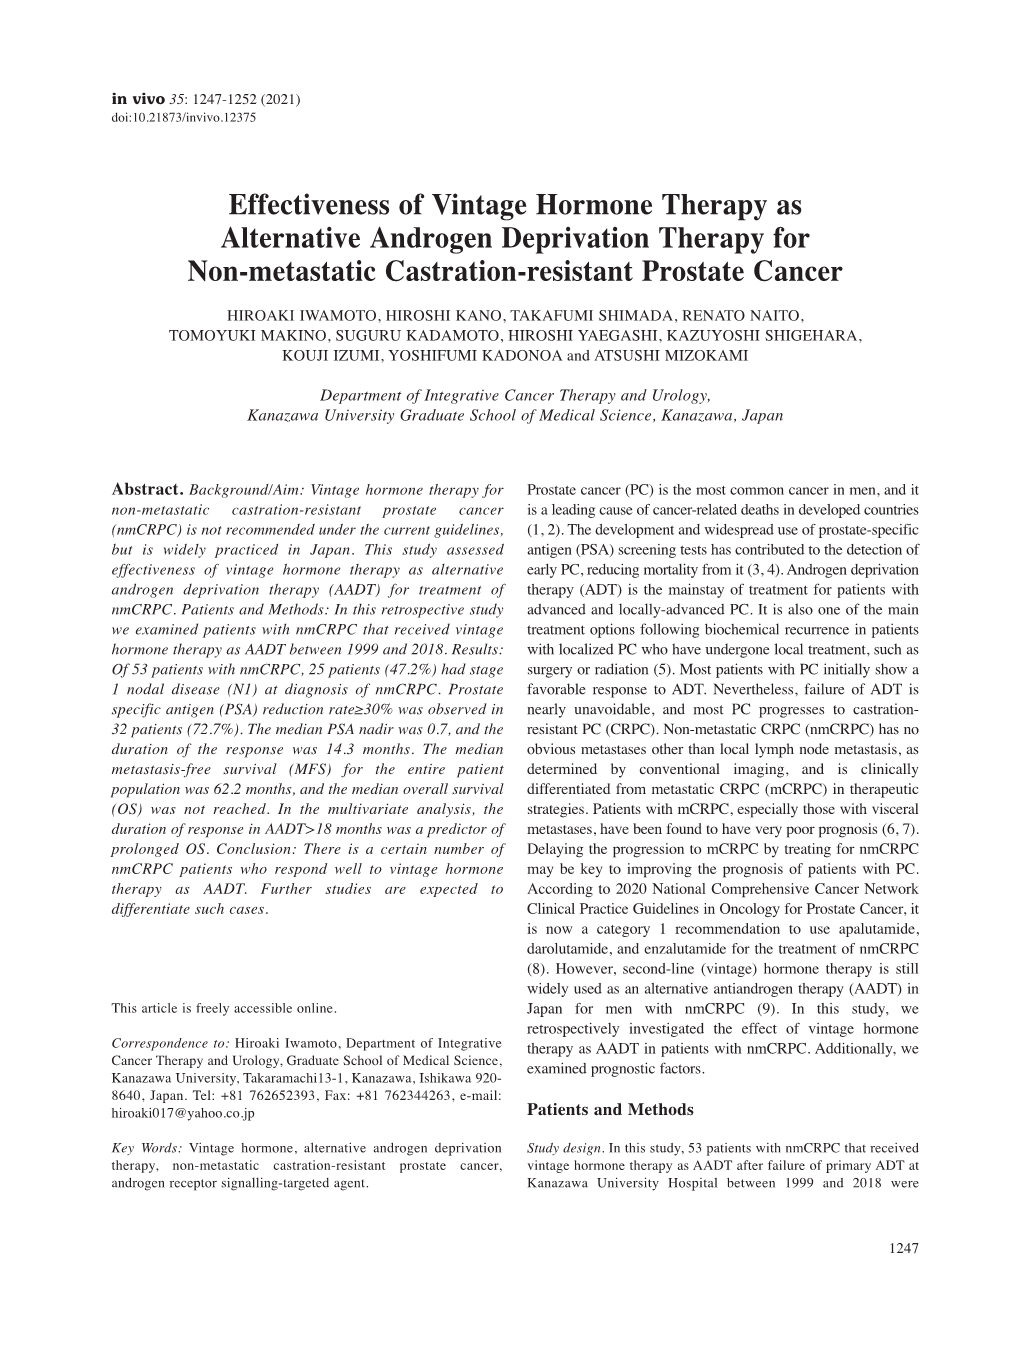 Effectiveness of Vintage Hormone Therapy As Alternative Androgen